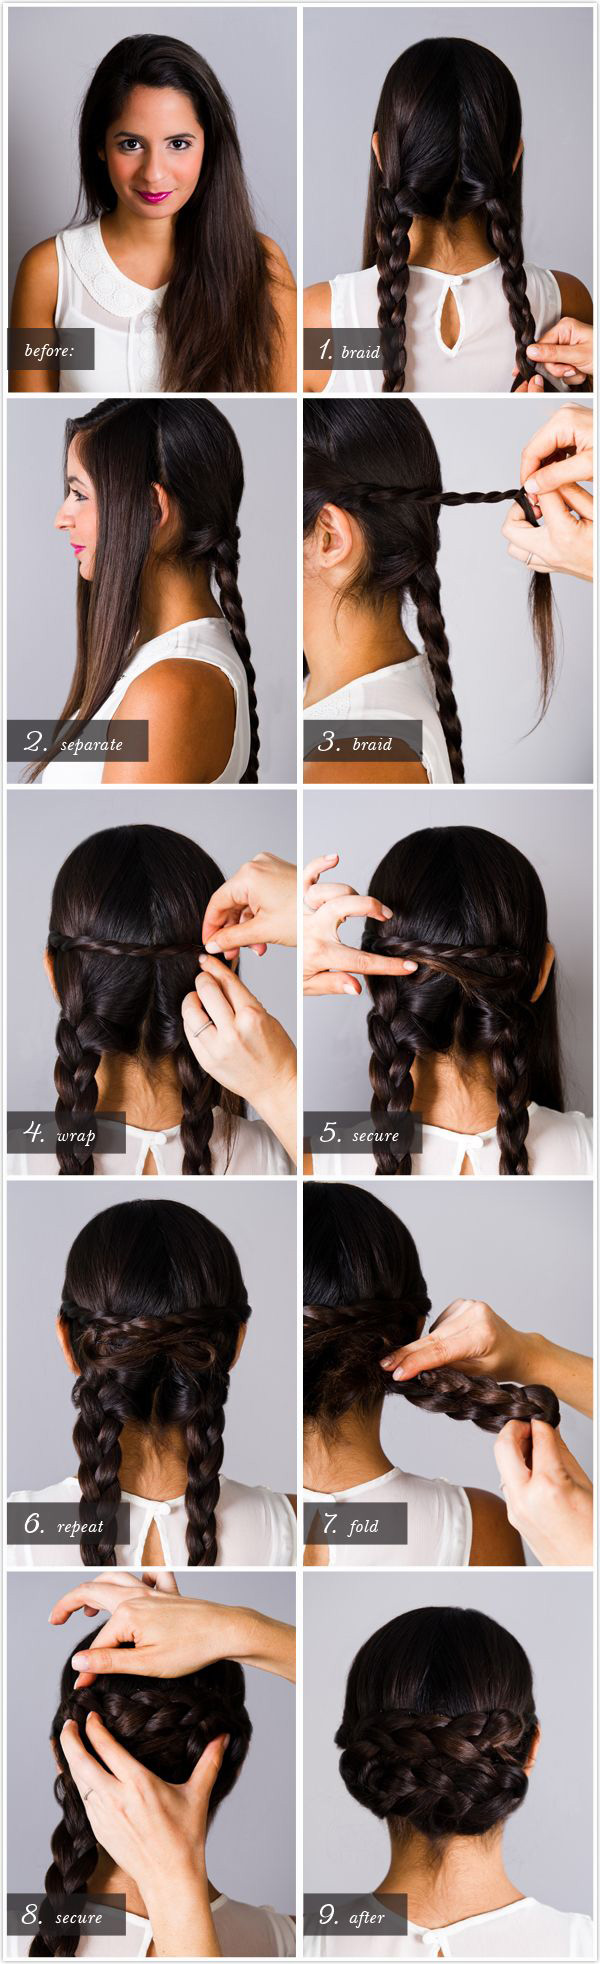 3 Best Hairstyles for Greasy Hair  Quick  Easy Styles for Oily Hair  IPSY